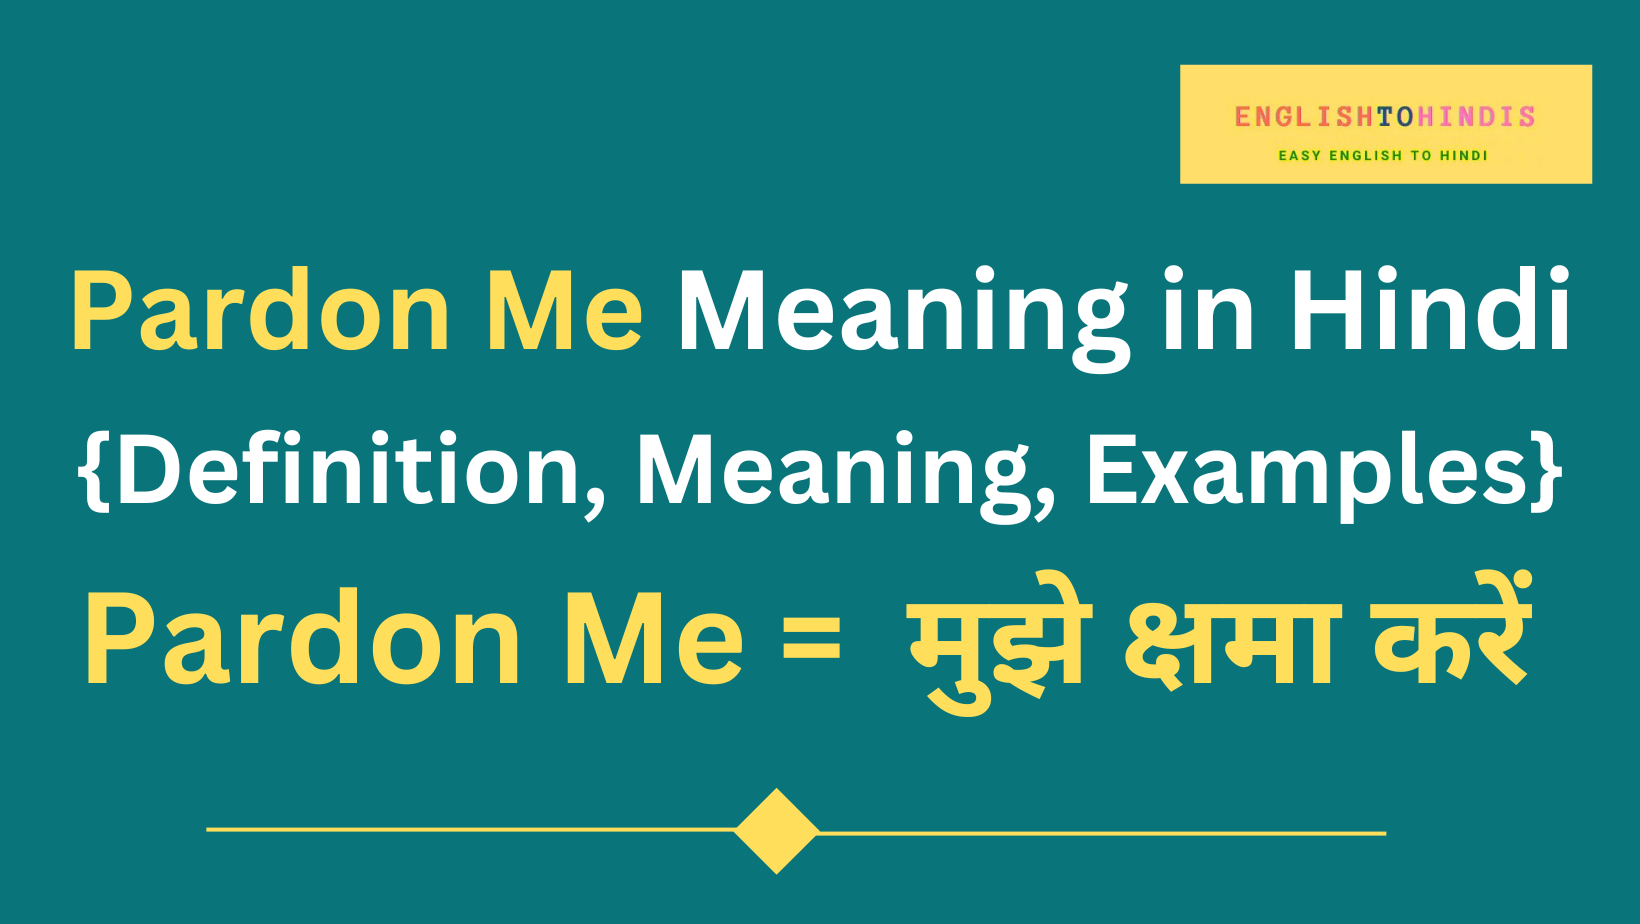 Pardon Me Meaning in Hindi